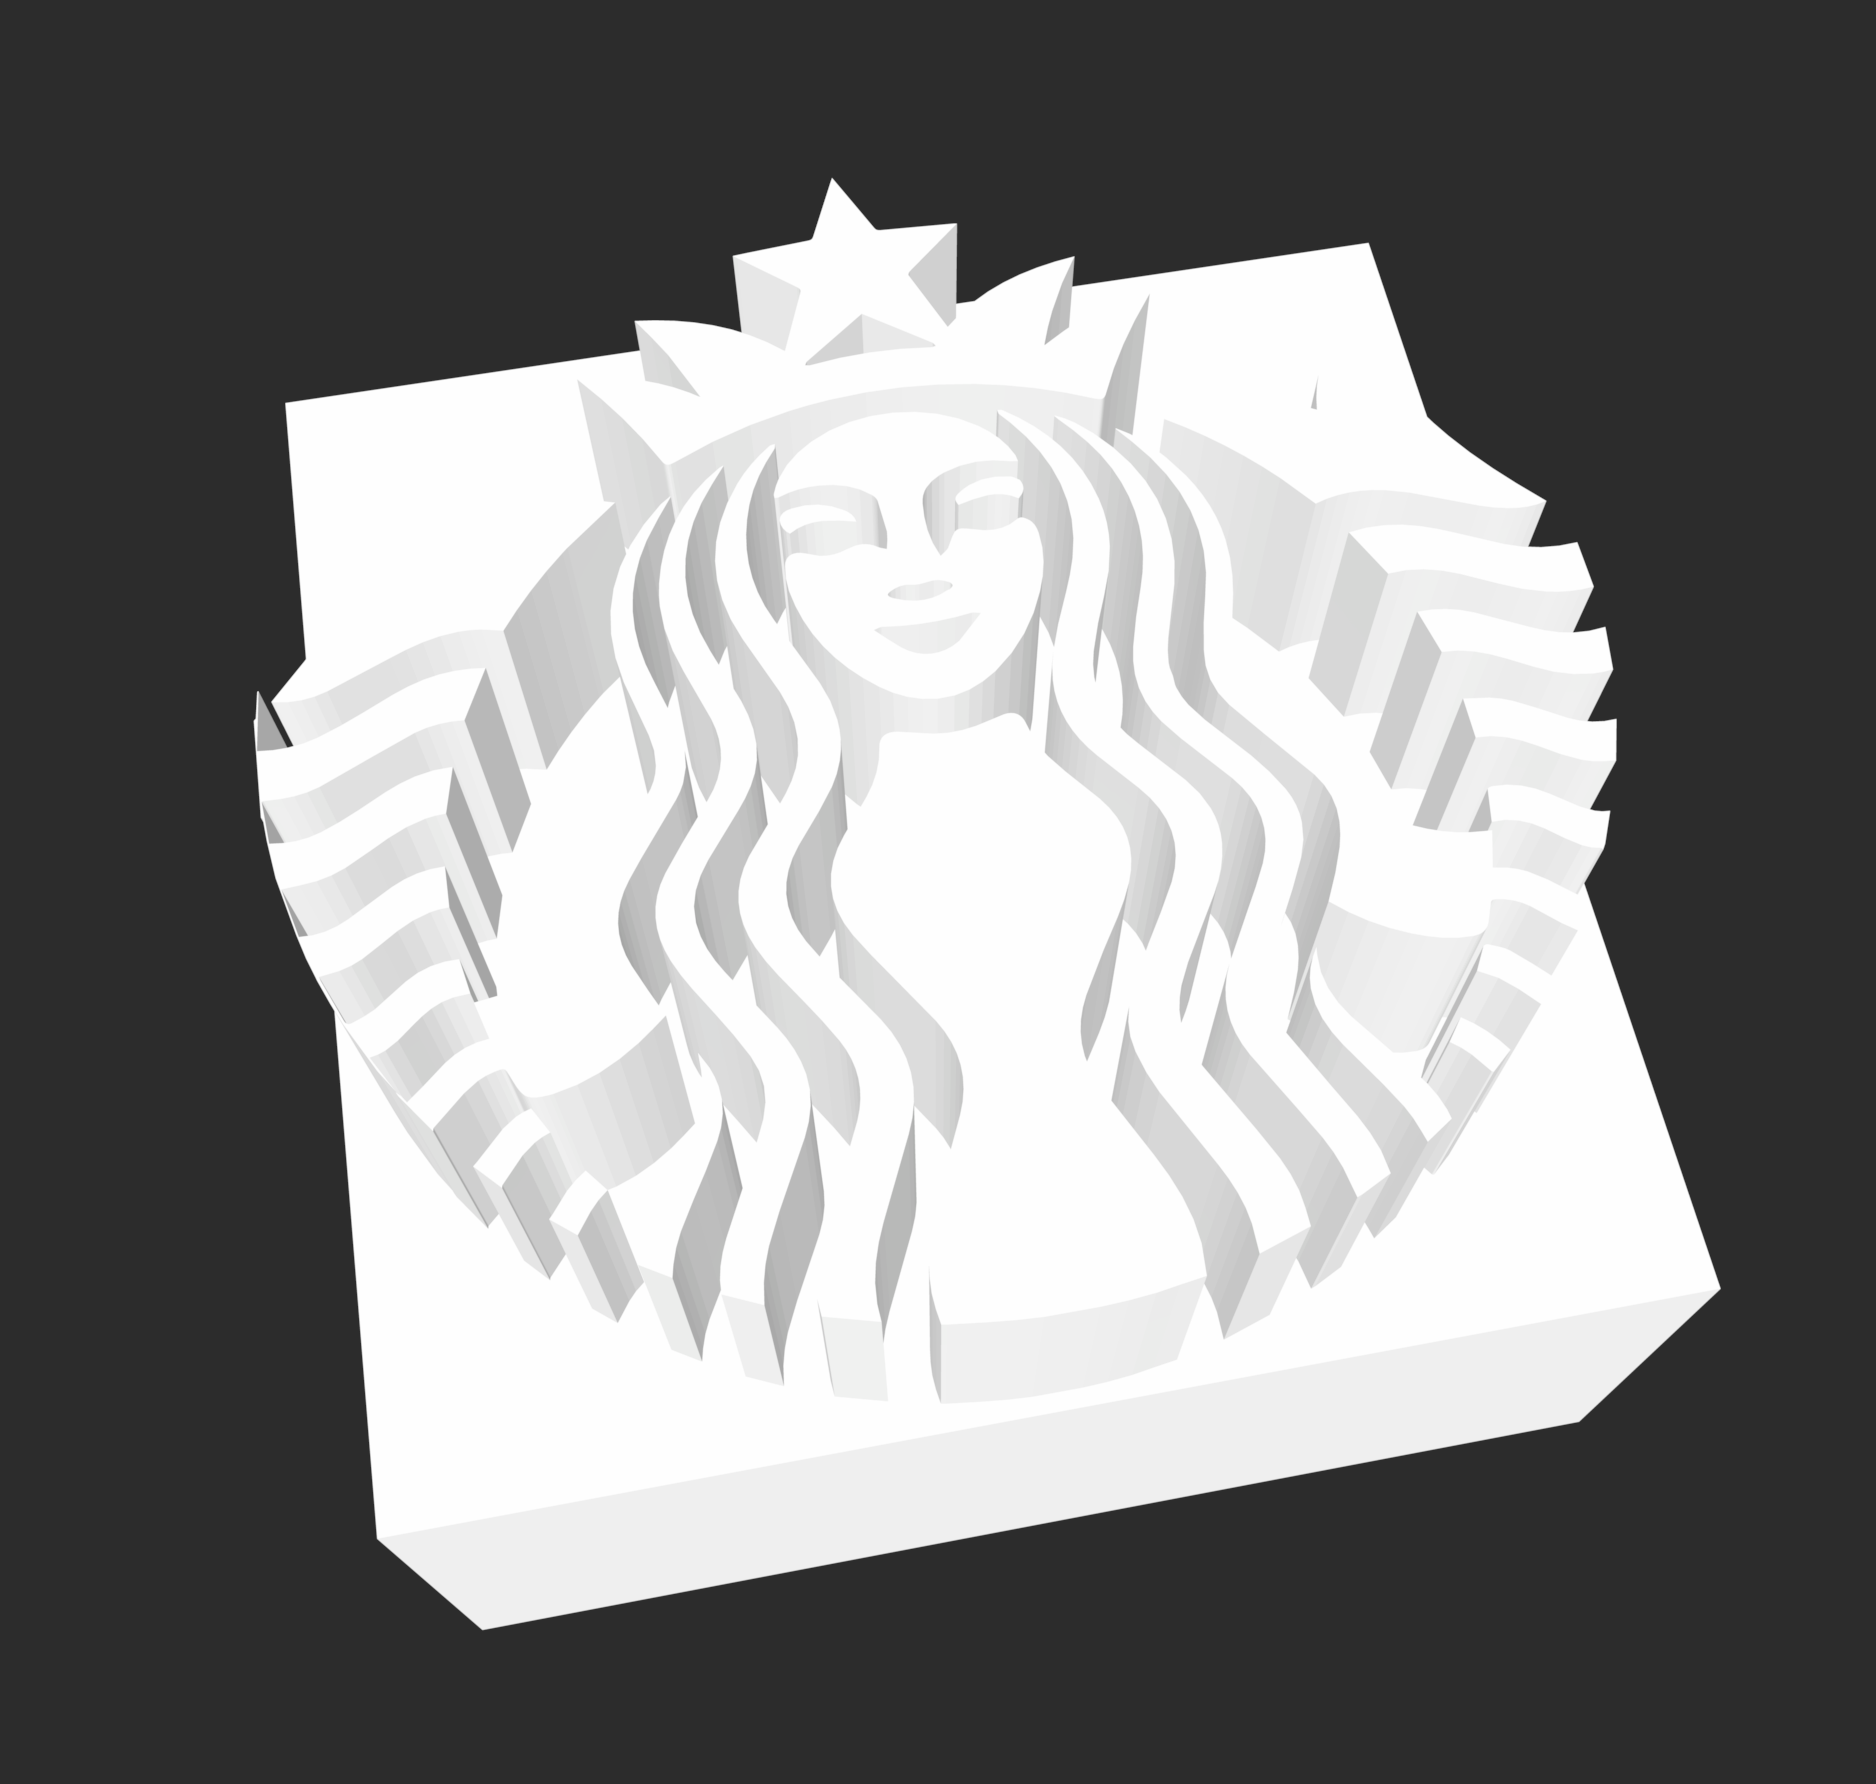 Starbucks Logo and symbol, meaning, history, PNG, brand